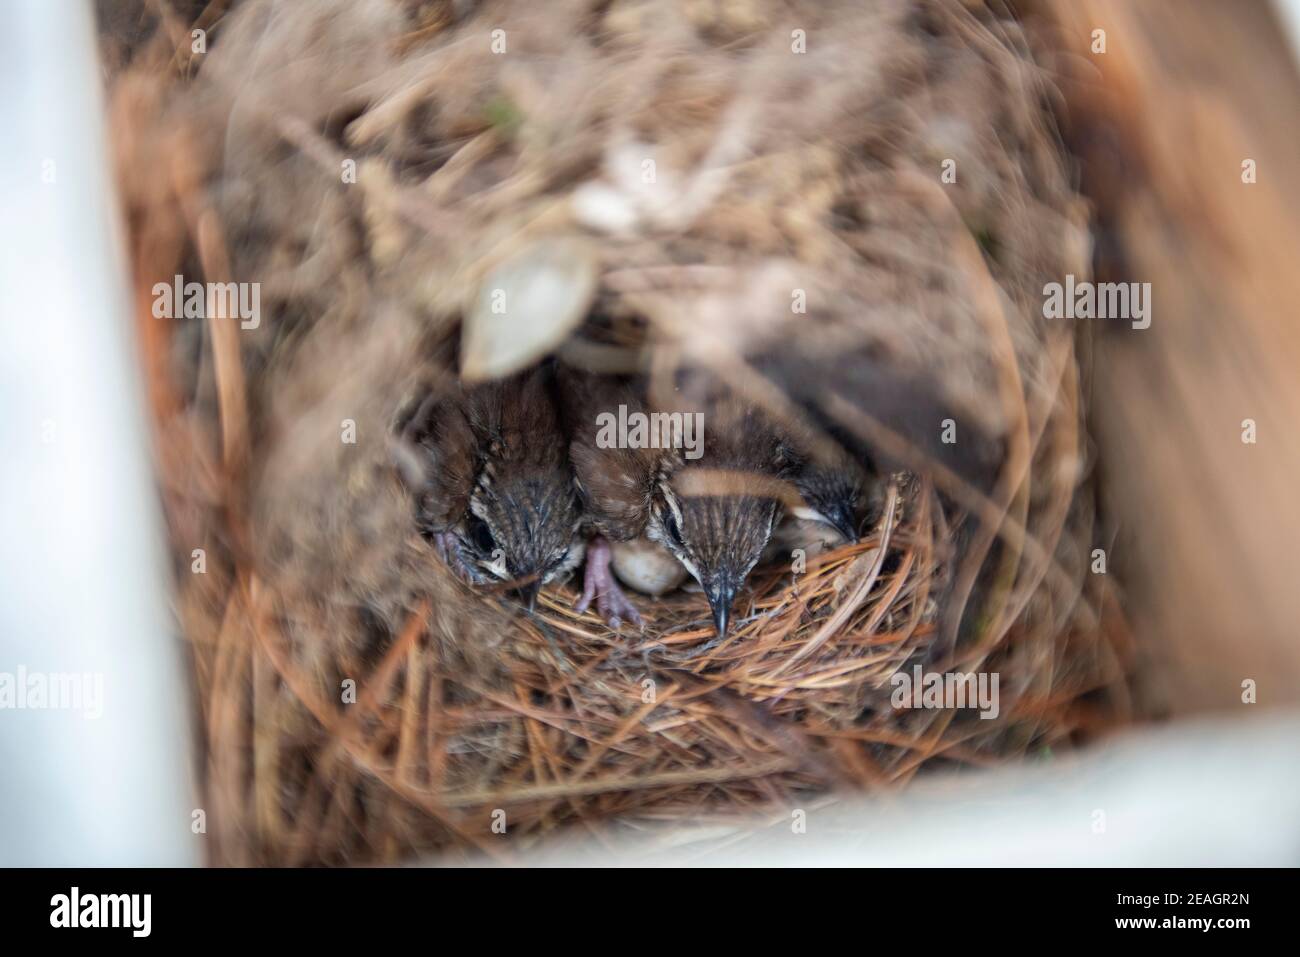 Carolina Wren (Thryothorus Ludovicianus) Baby Chicks in Bird Nest. Series of consecutive days showing growth, frame 10 of 12. Stock Photo